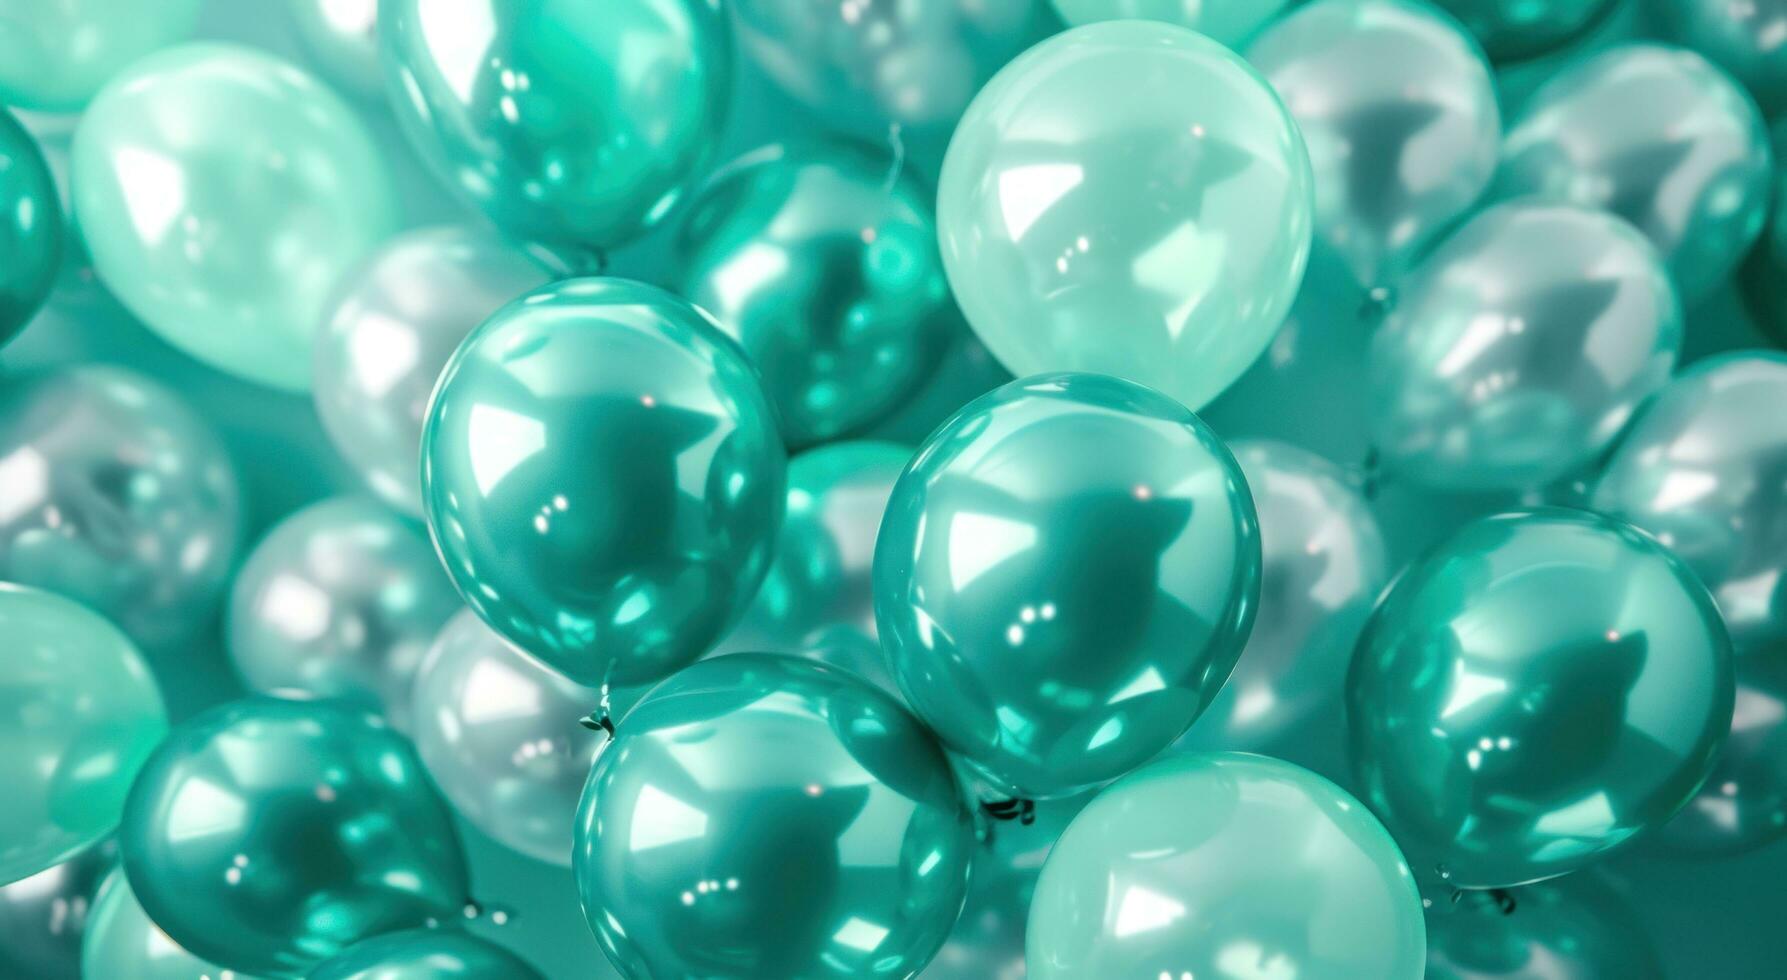 AI generated a background full of green and blue balloons photo